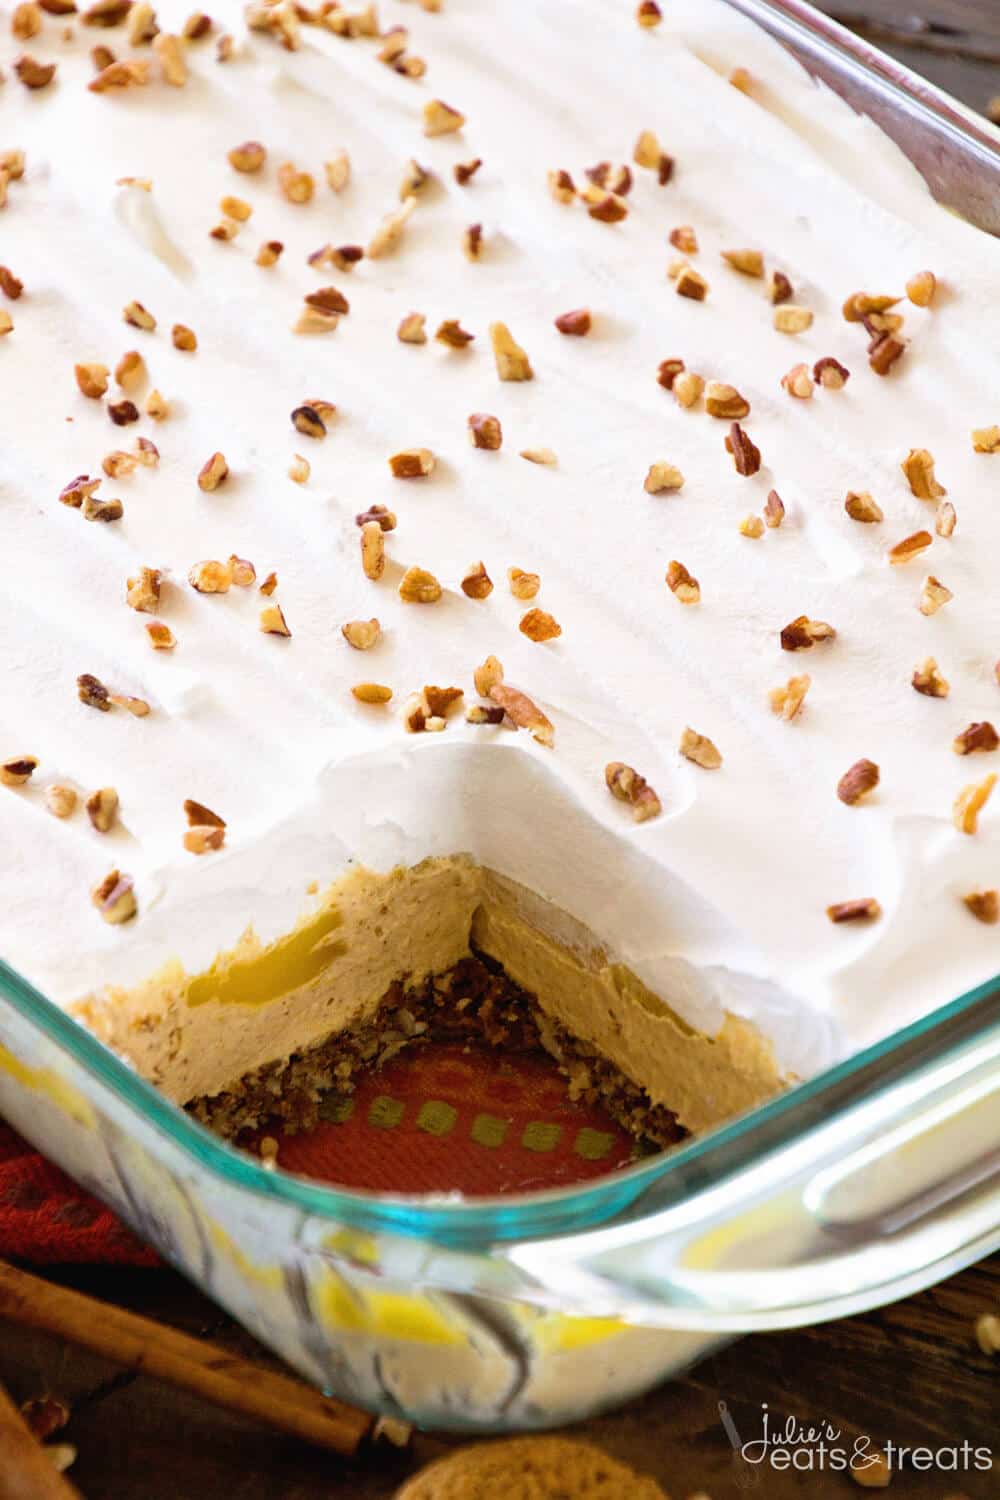 Pumpkin Lasagna Dessert ~ Creamy, Delicious Pumpkin Dessert with Layers of Gingersnap Cookies, Vanilla Pudding and Pumpkin! You Won't Be Able to Stop with One Bite!